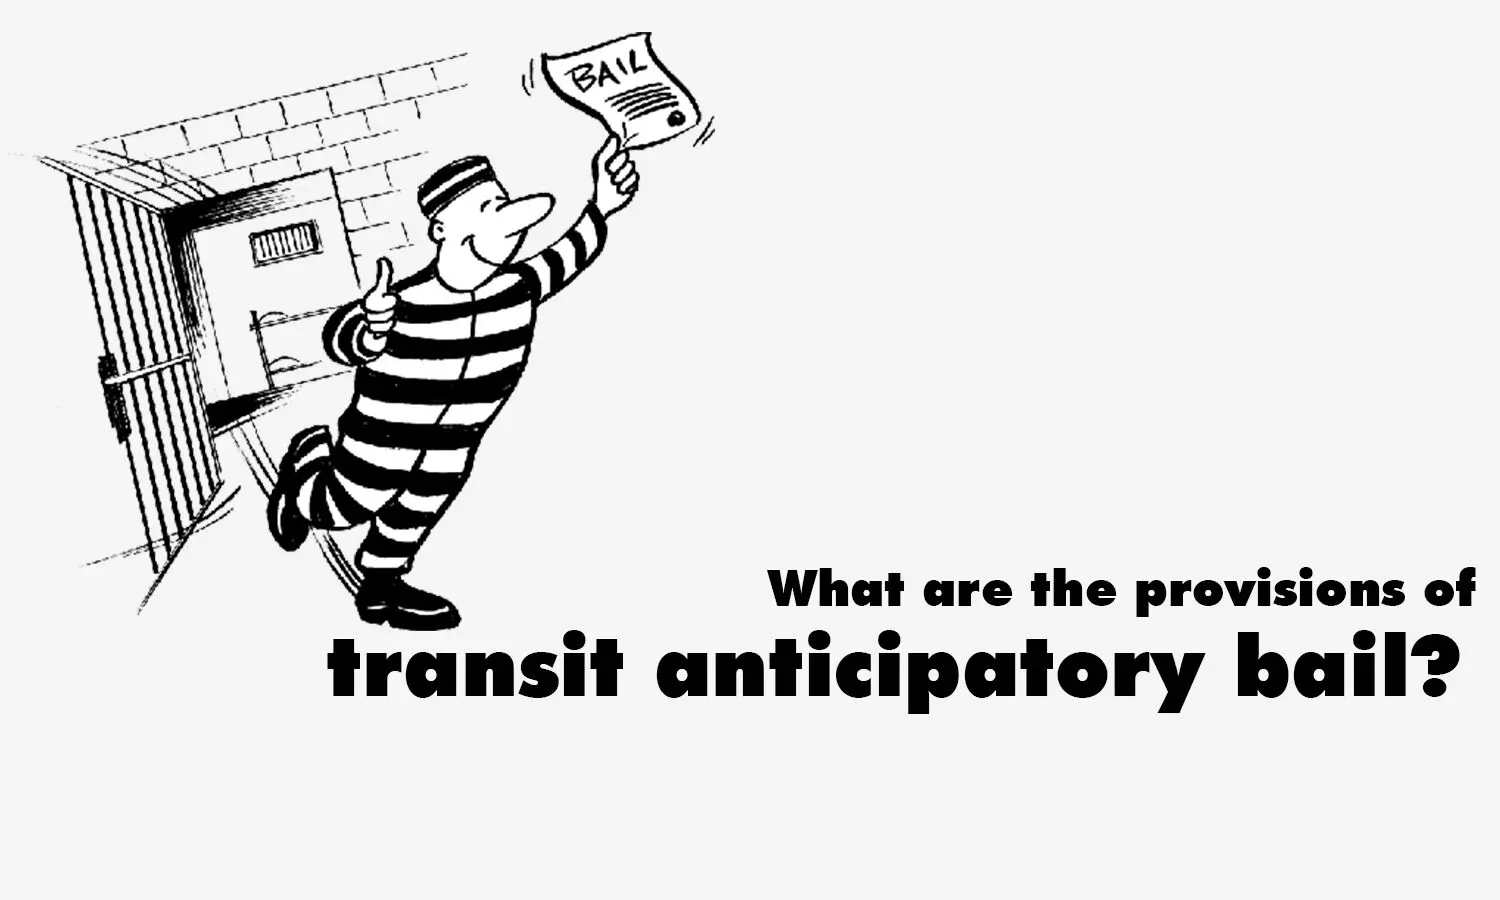 What are the provisions of transit anticipatory bail?